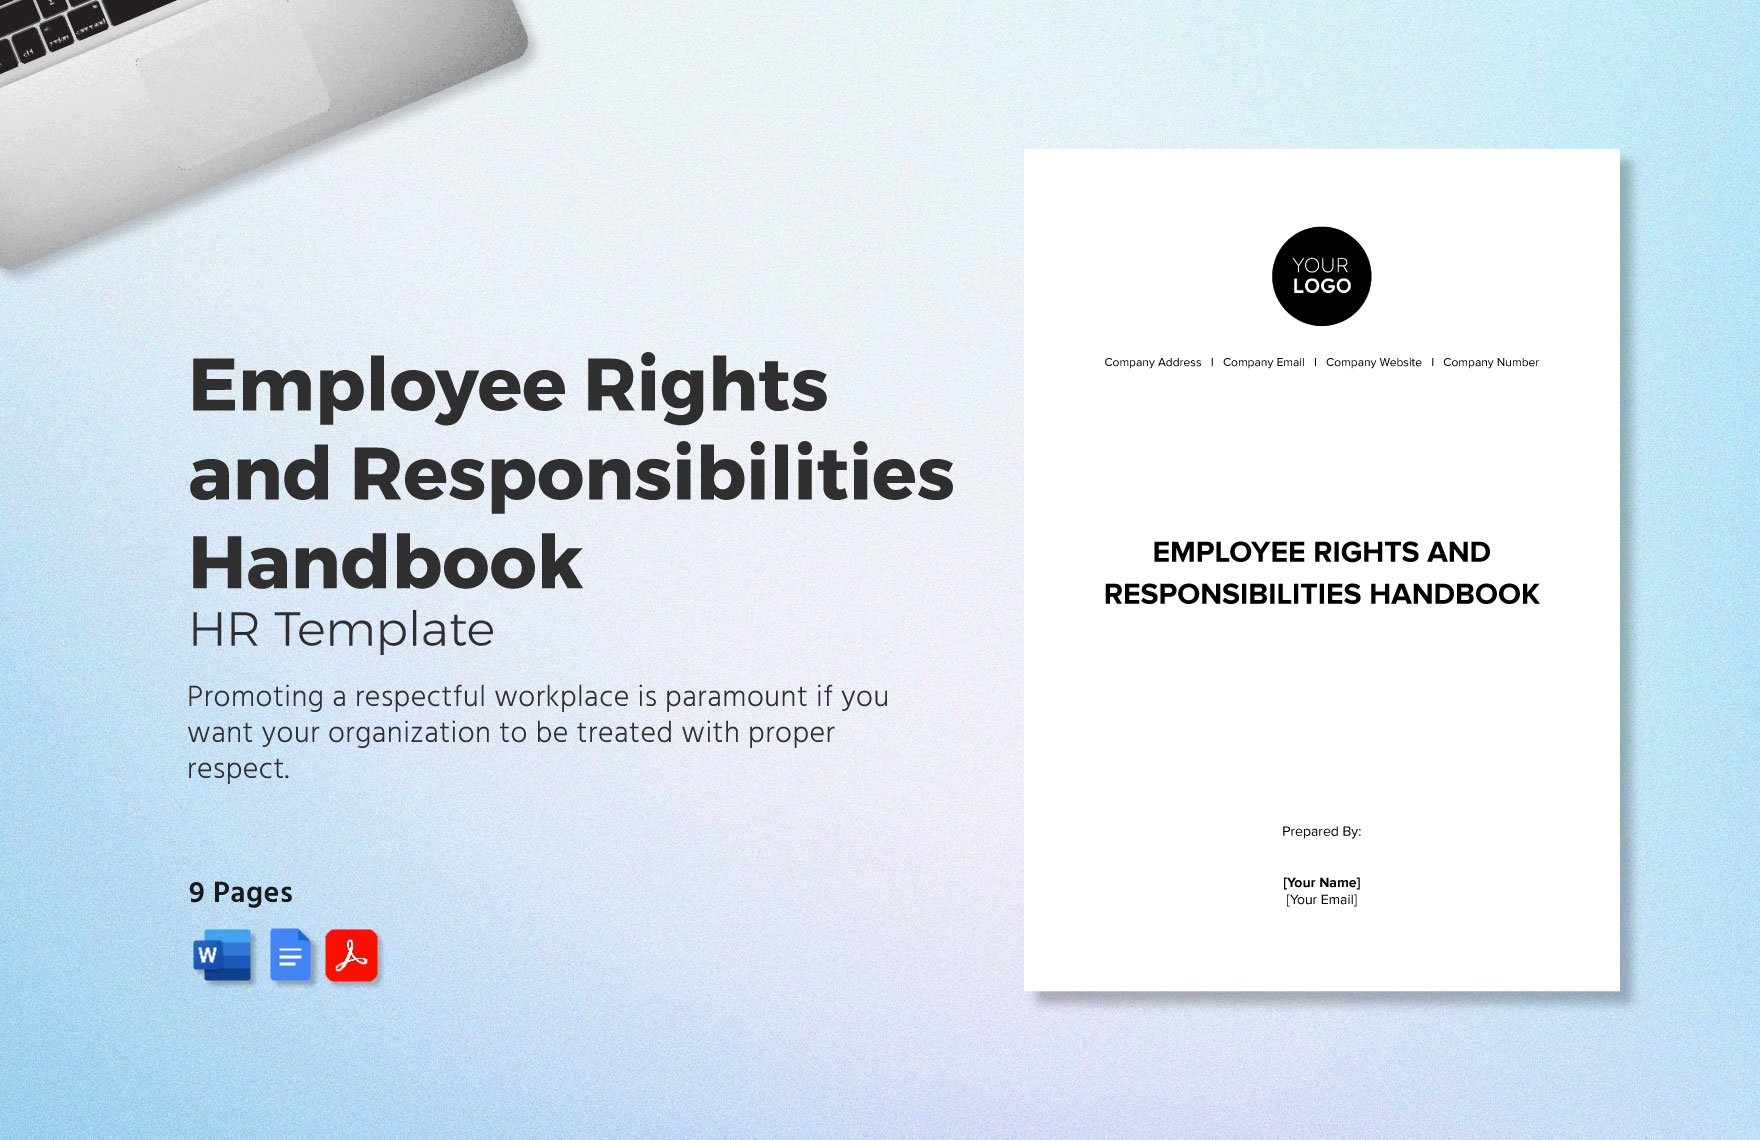 Employee Rights and Responsibilities Handbook HR Template